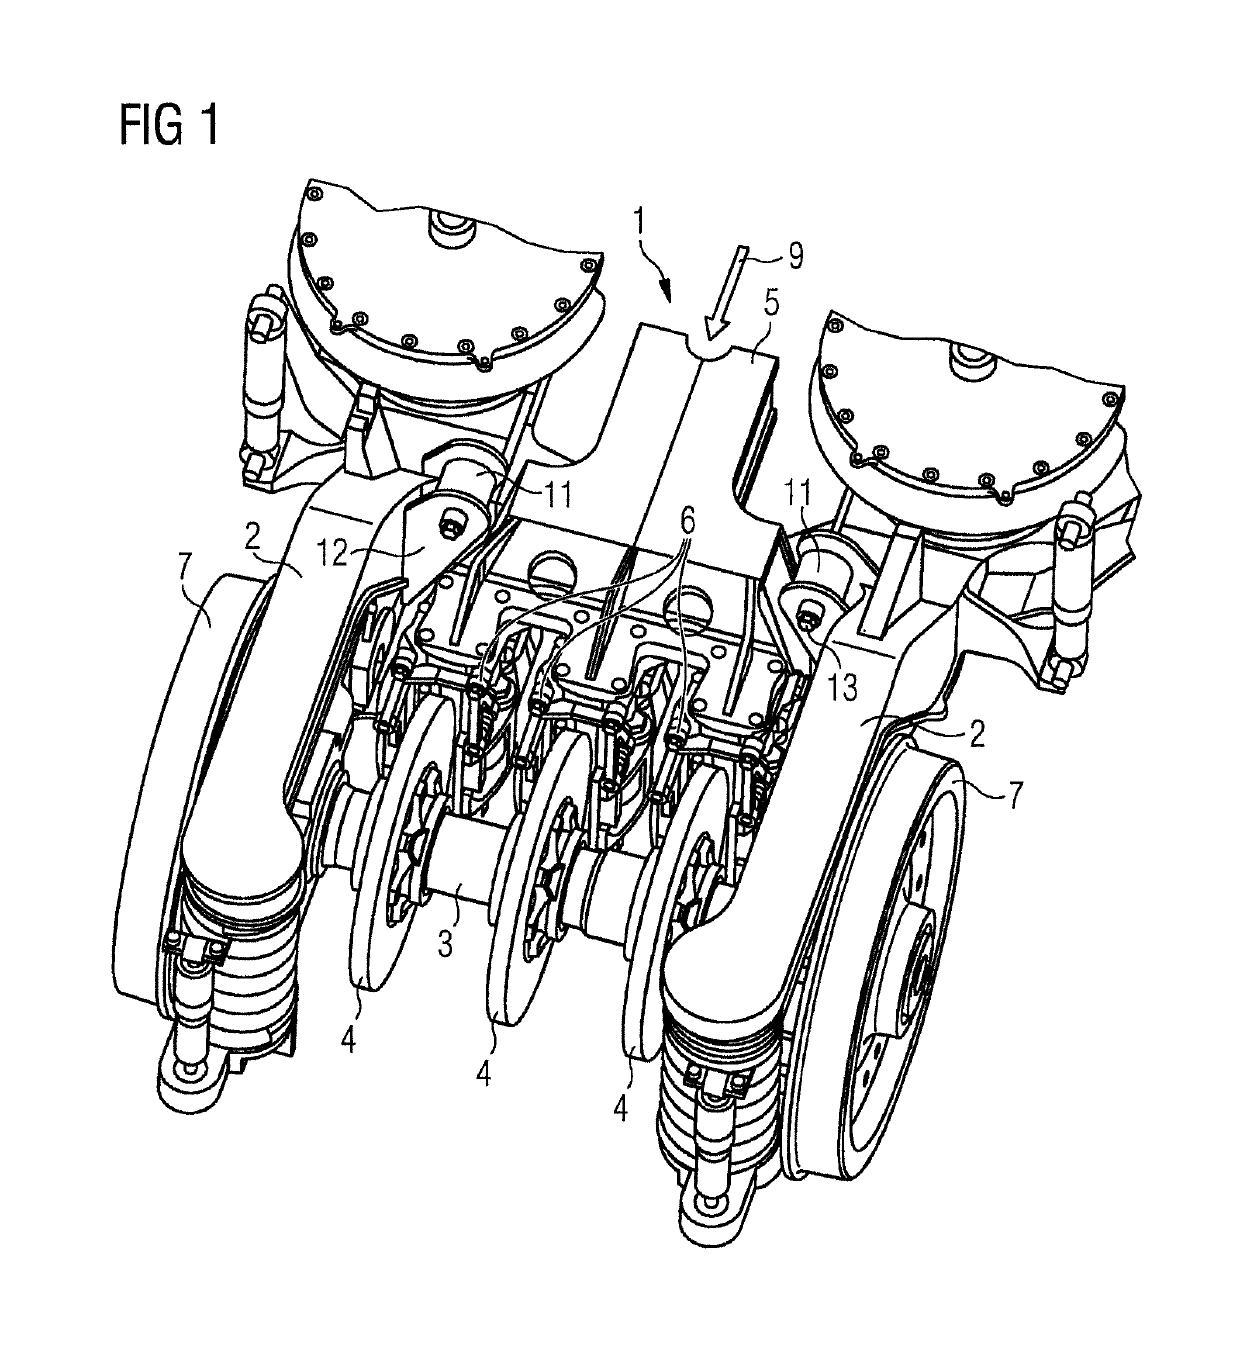 Device for reducing vibrations of a rail vehicle